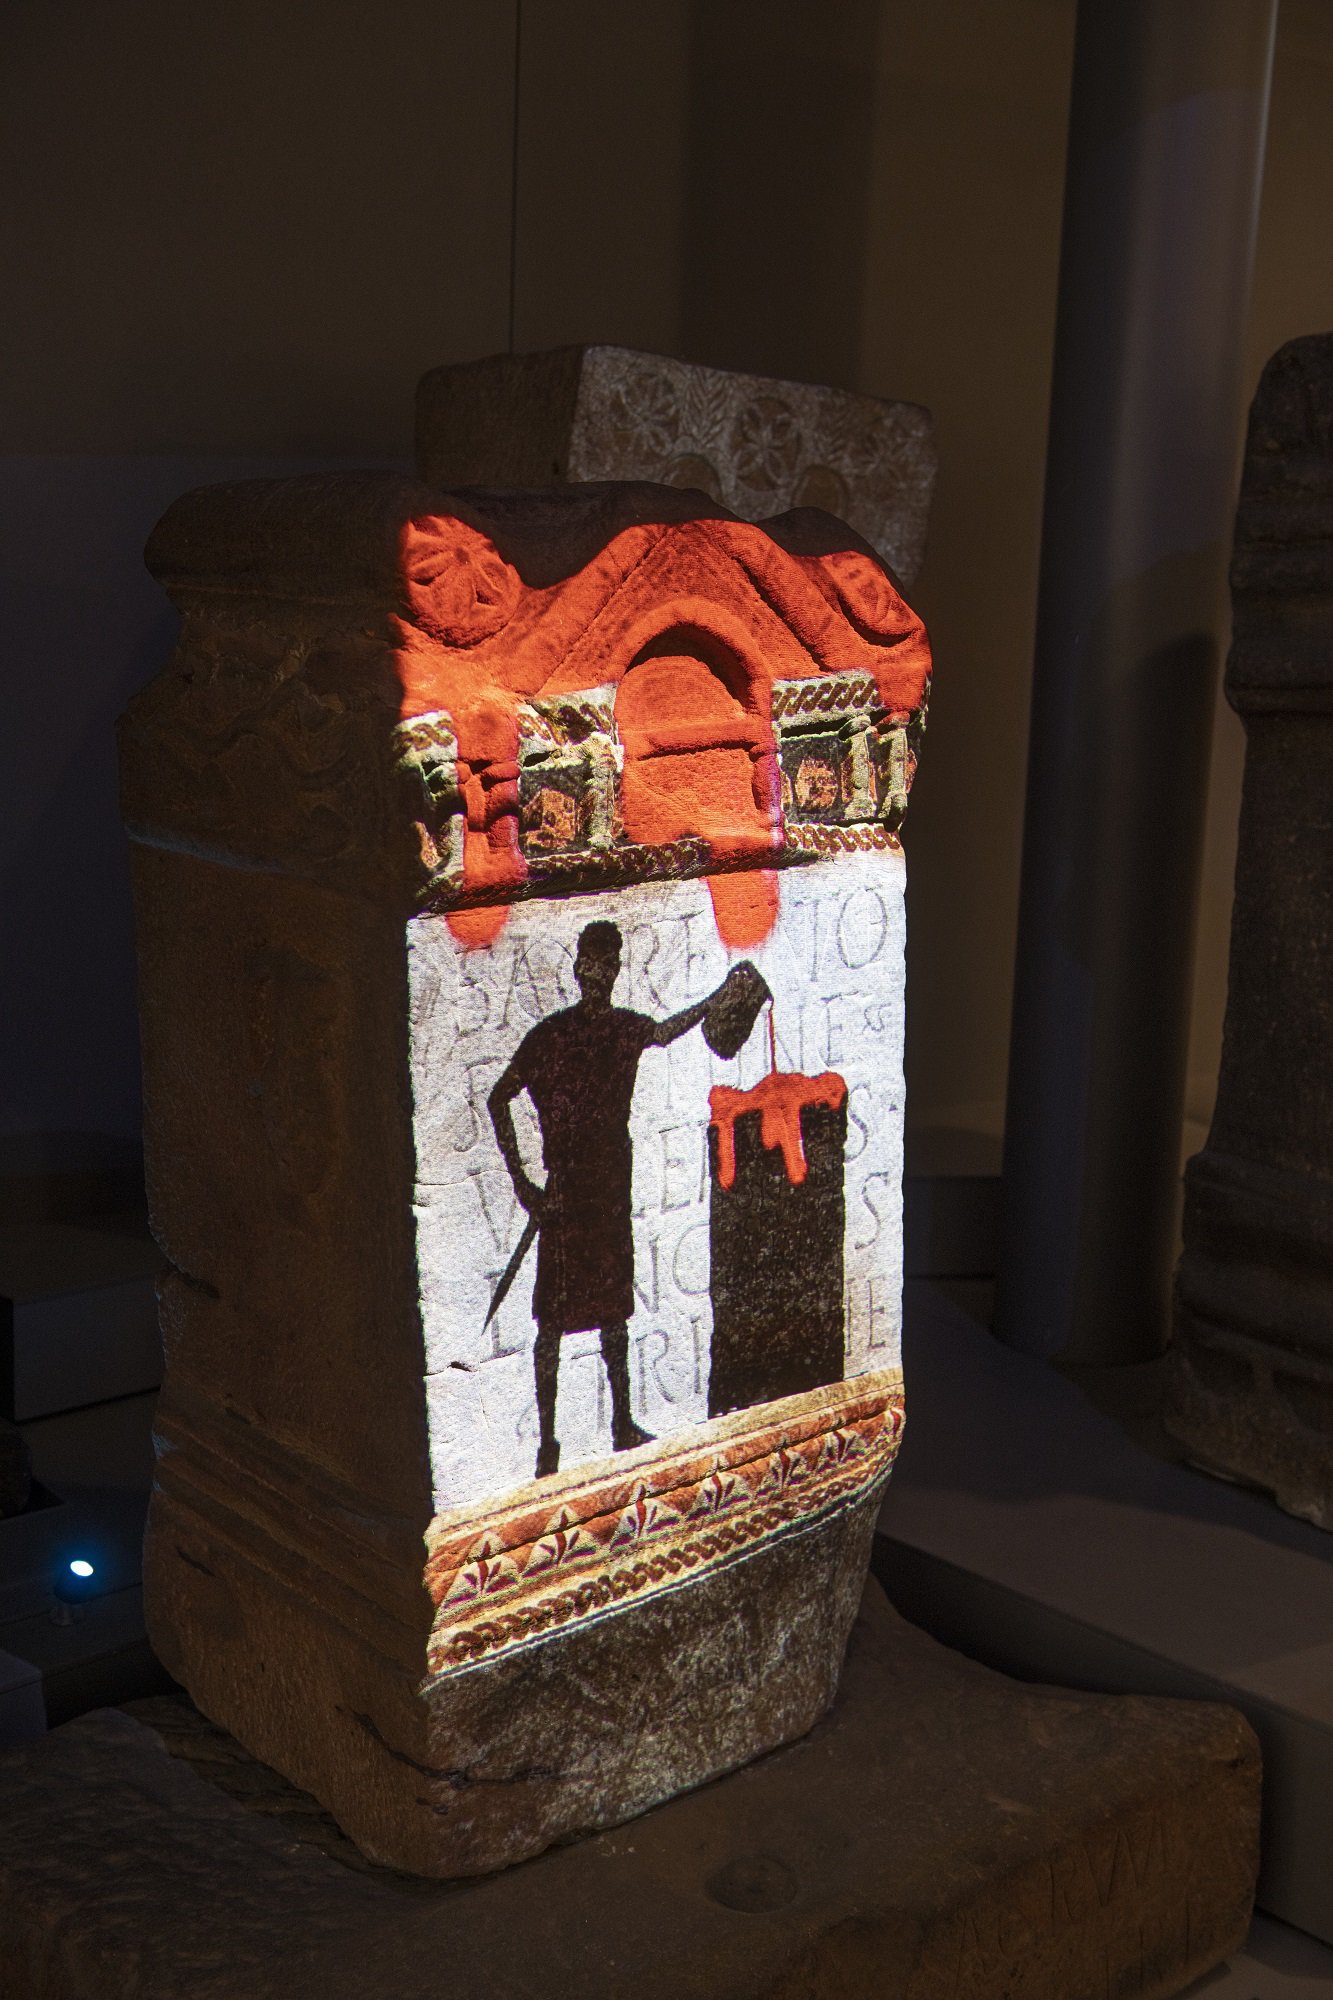 A Roman altar with an image projected onto it. It shows a soldier pouring either red wine or blood onto the top of an altar.